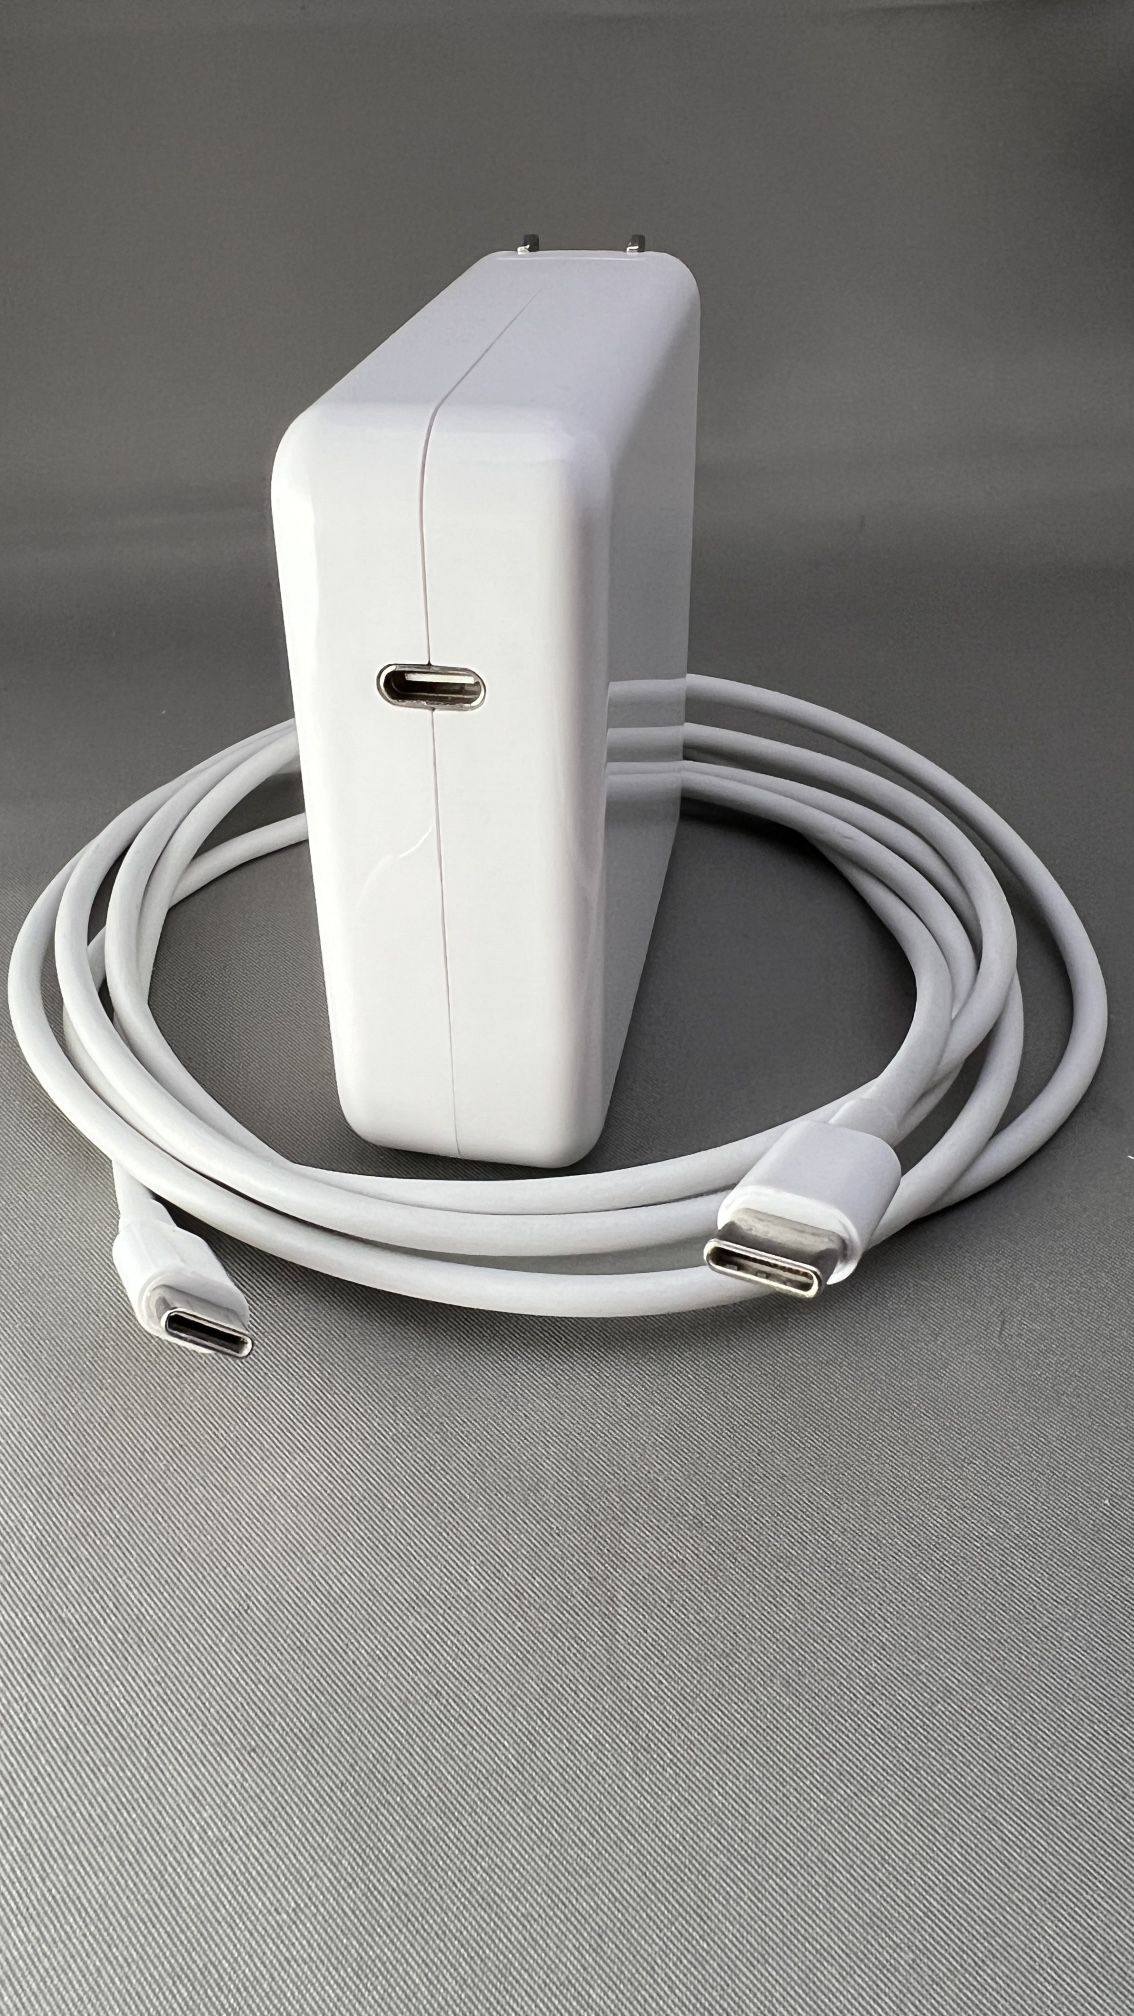 Apple Mac Book Pro / Air Charger 